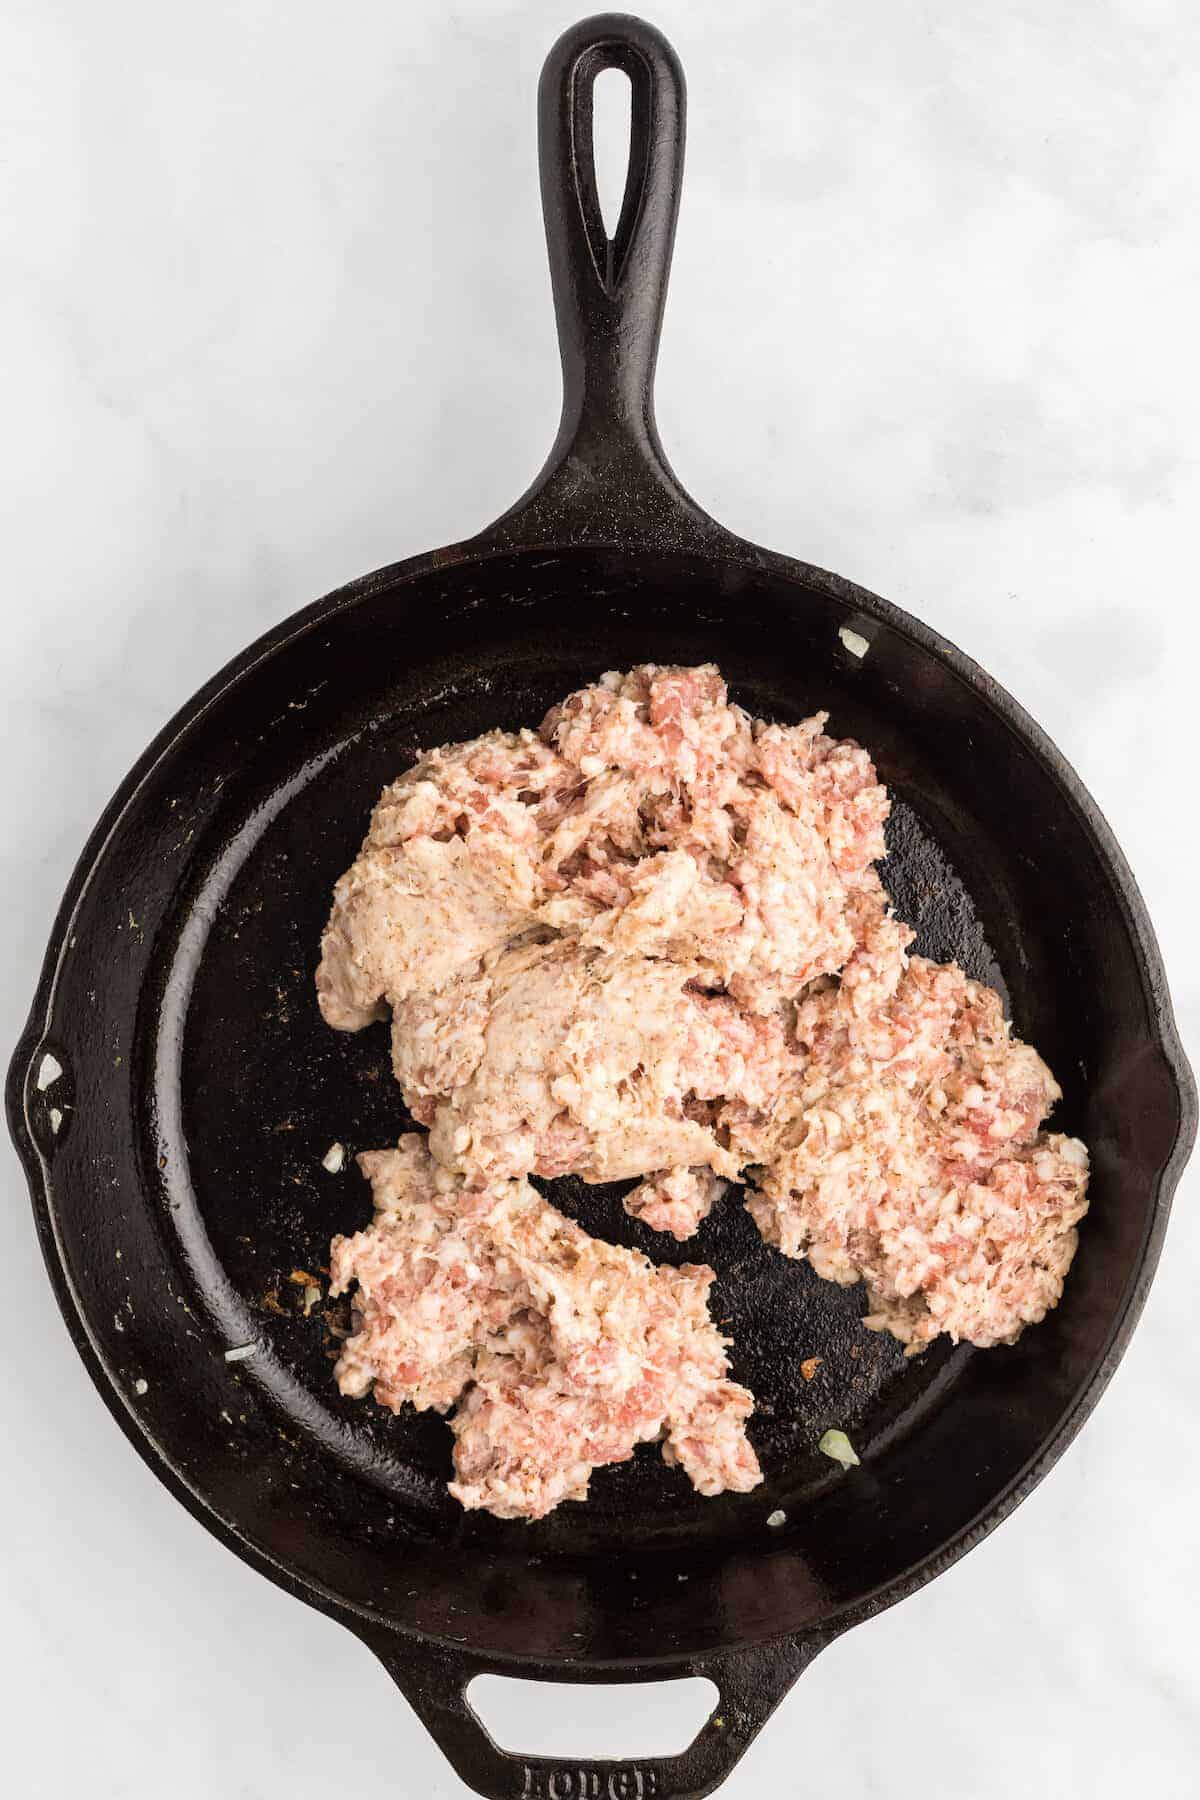 cooking the ground sausage in the cast iron skillet.